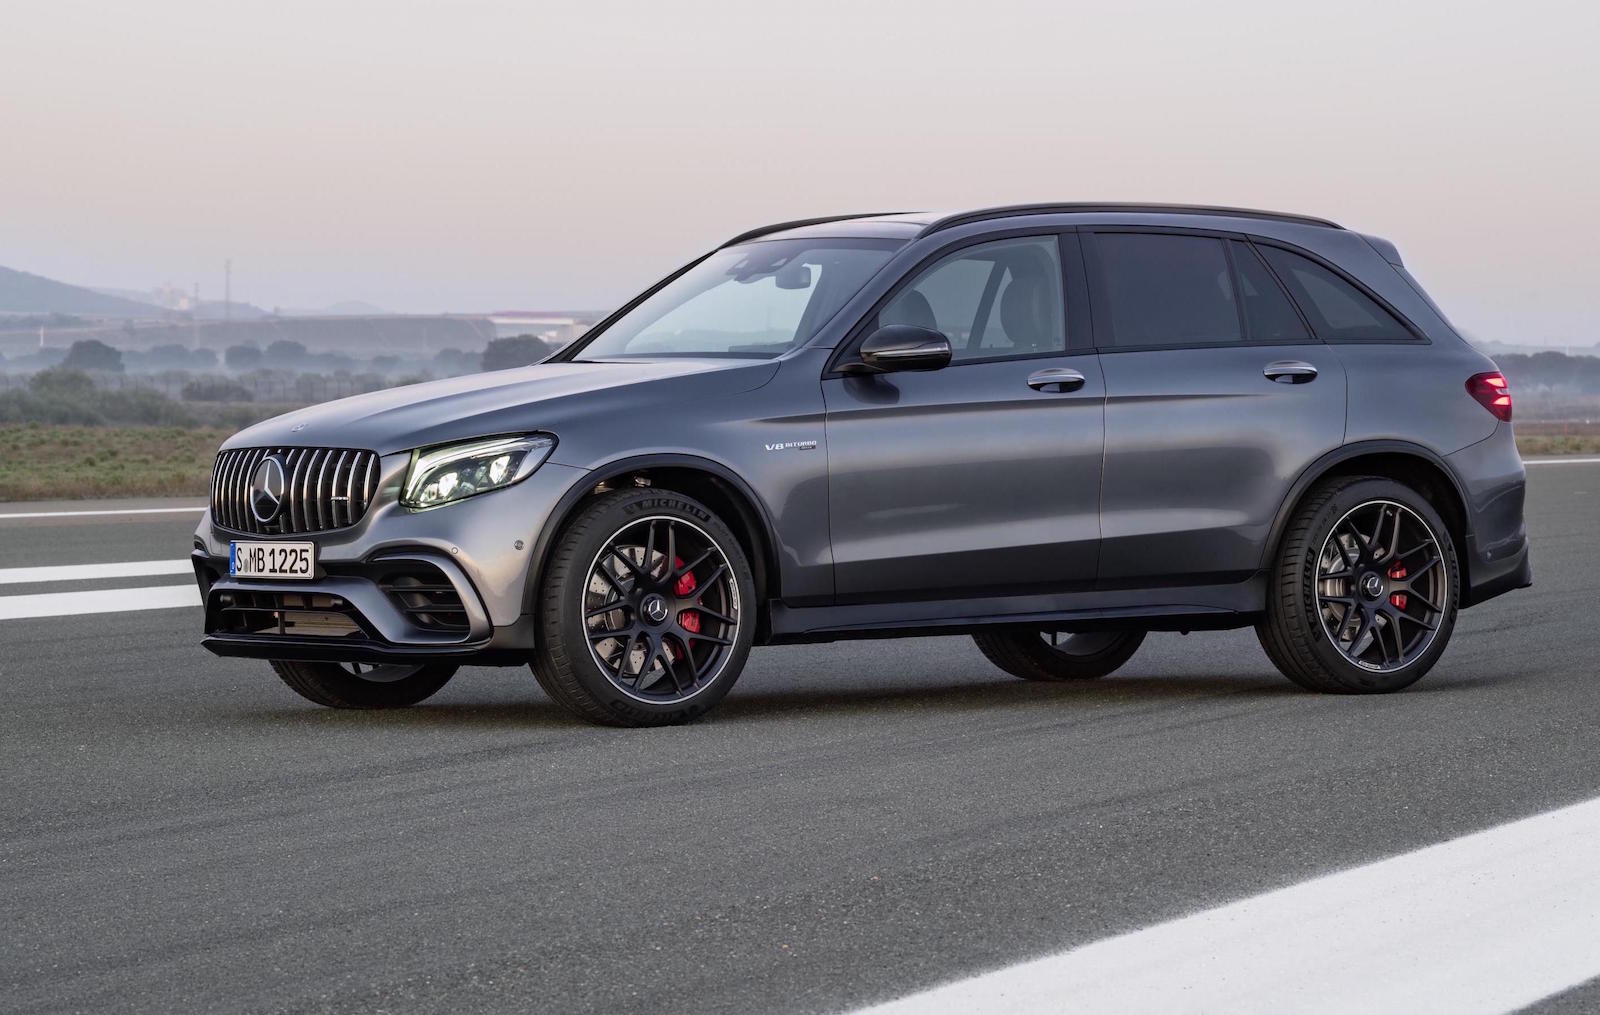 Mercedes-AMG GLC 63 revealed; most powerful SUV in the class